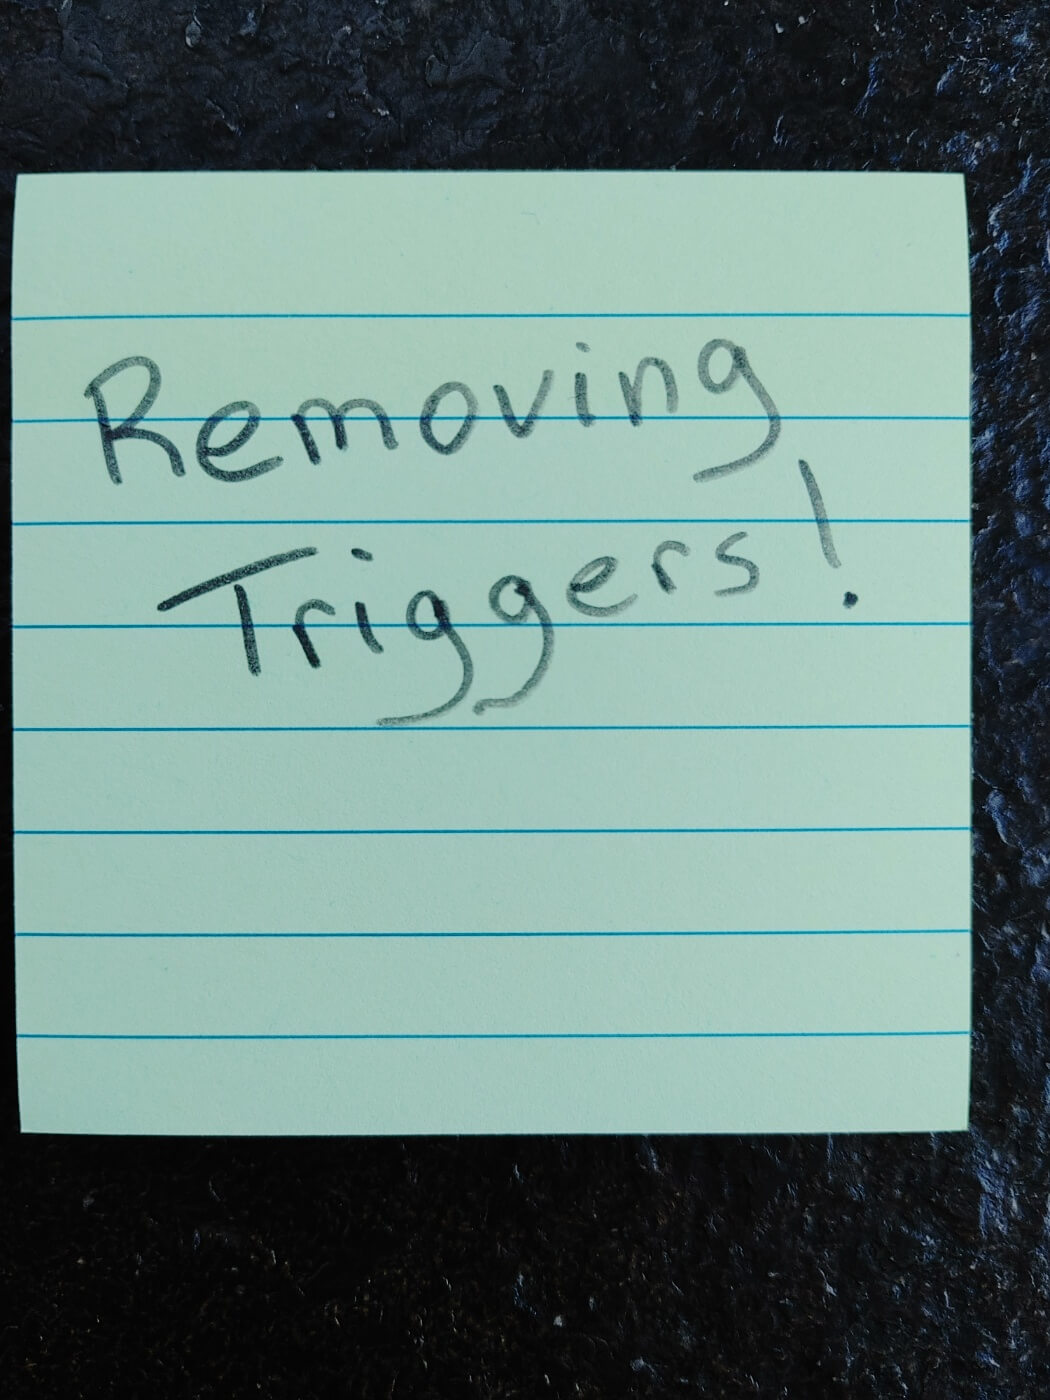 Breaking Dad’s Bad Habits: Removing Triggers